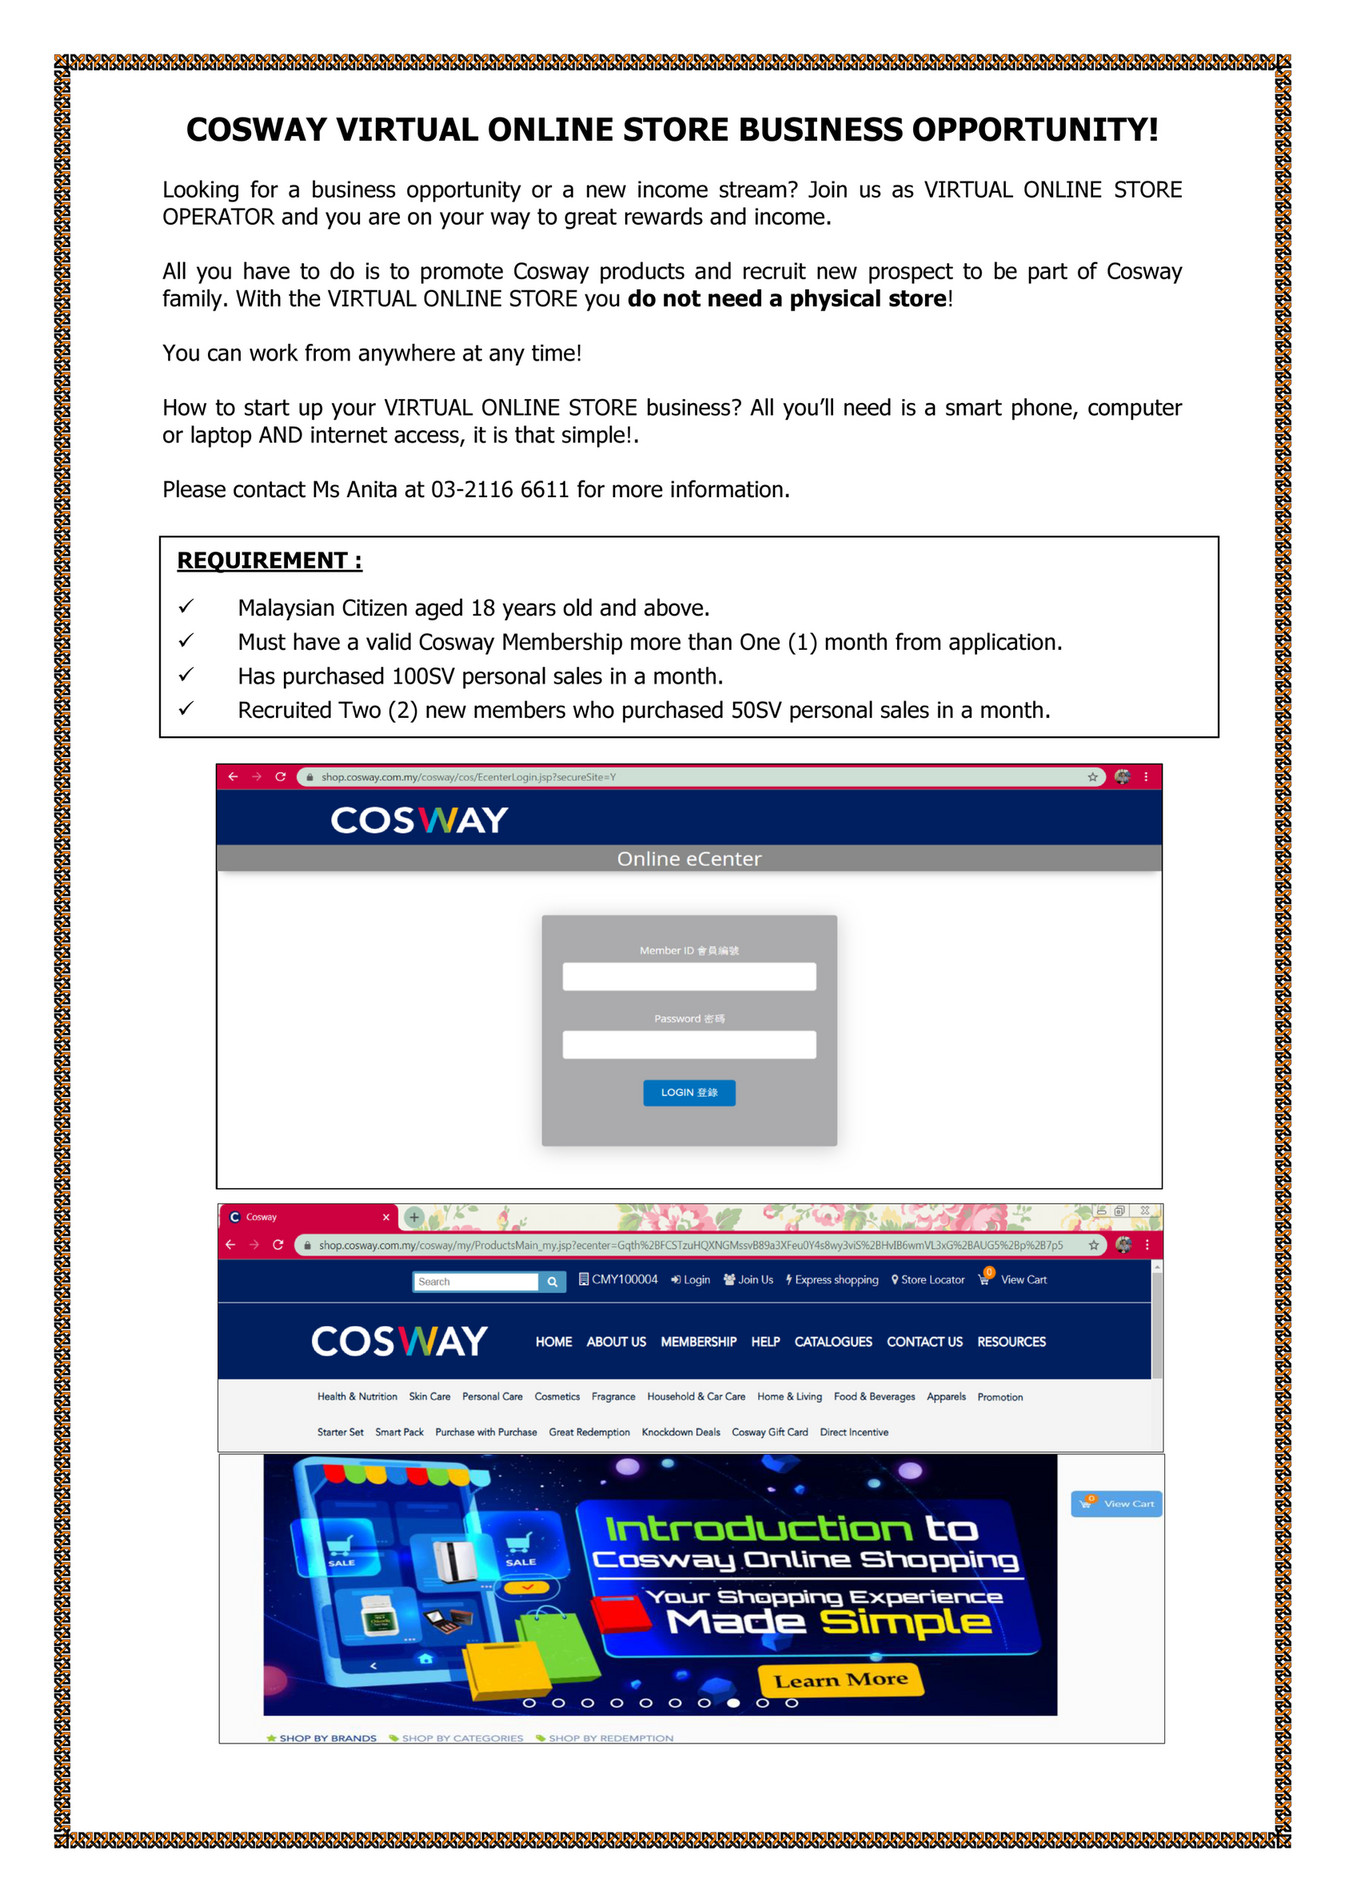 Cosway Malaysia - Cosway Virtual Online Store Business Opportunity